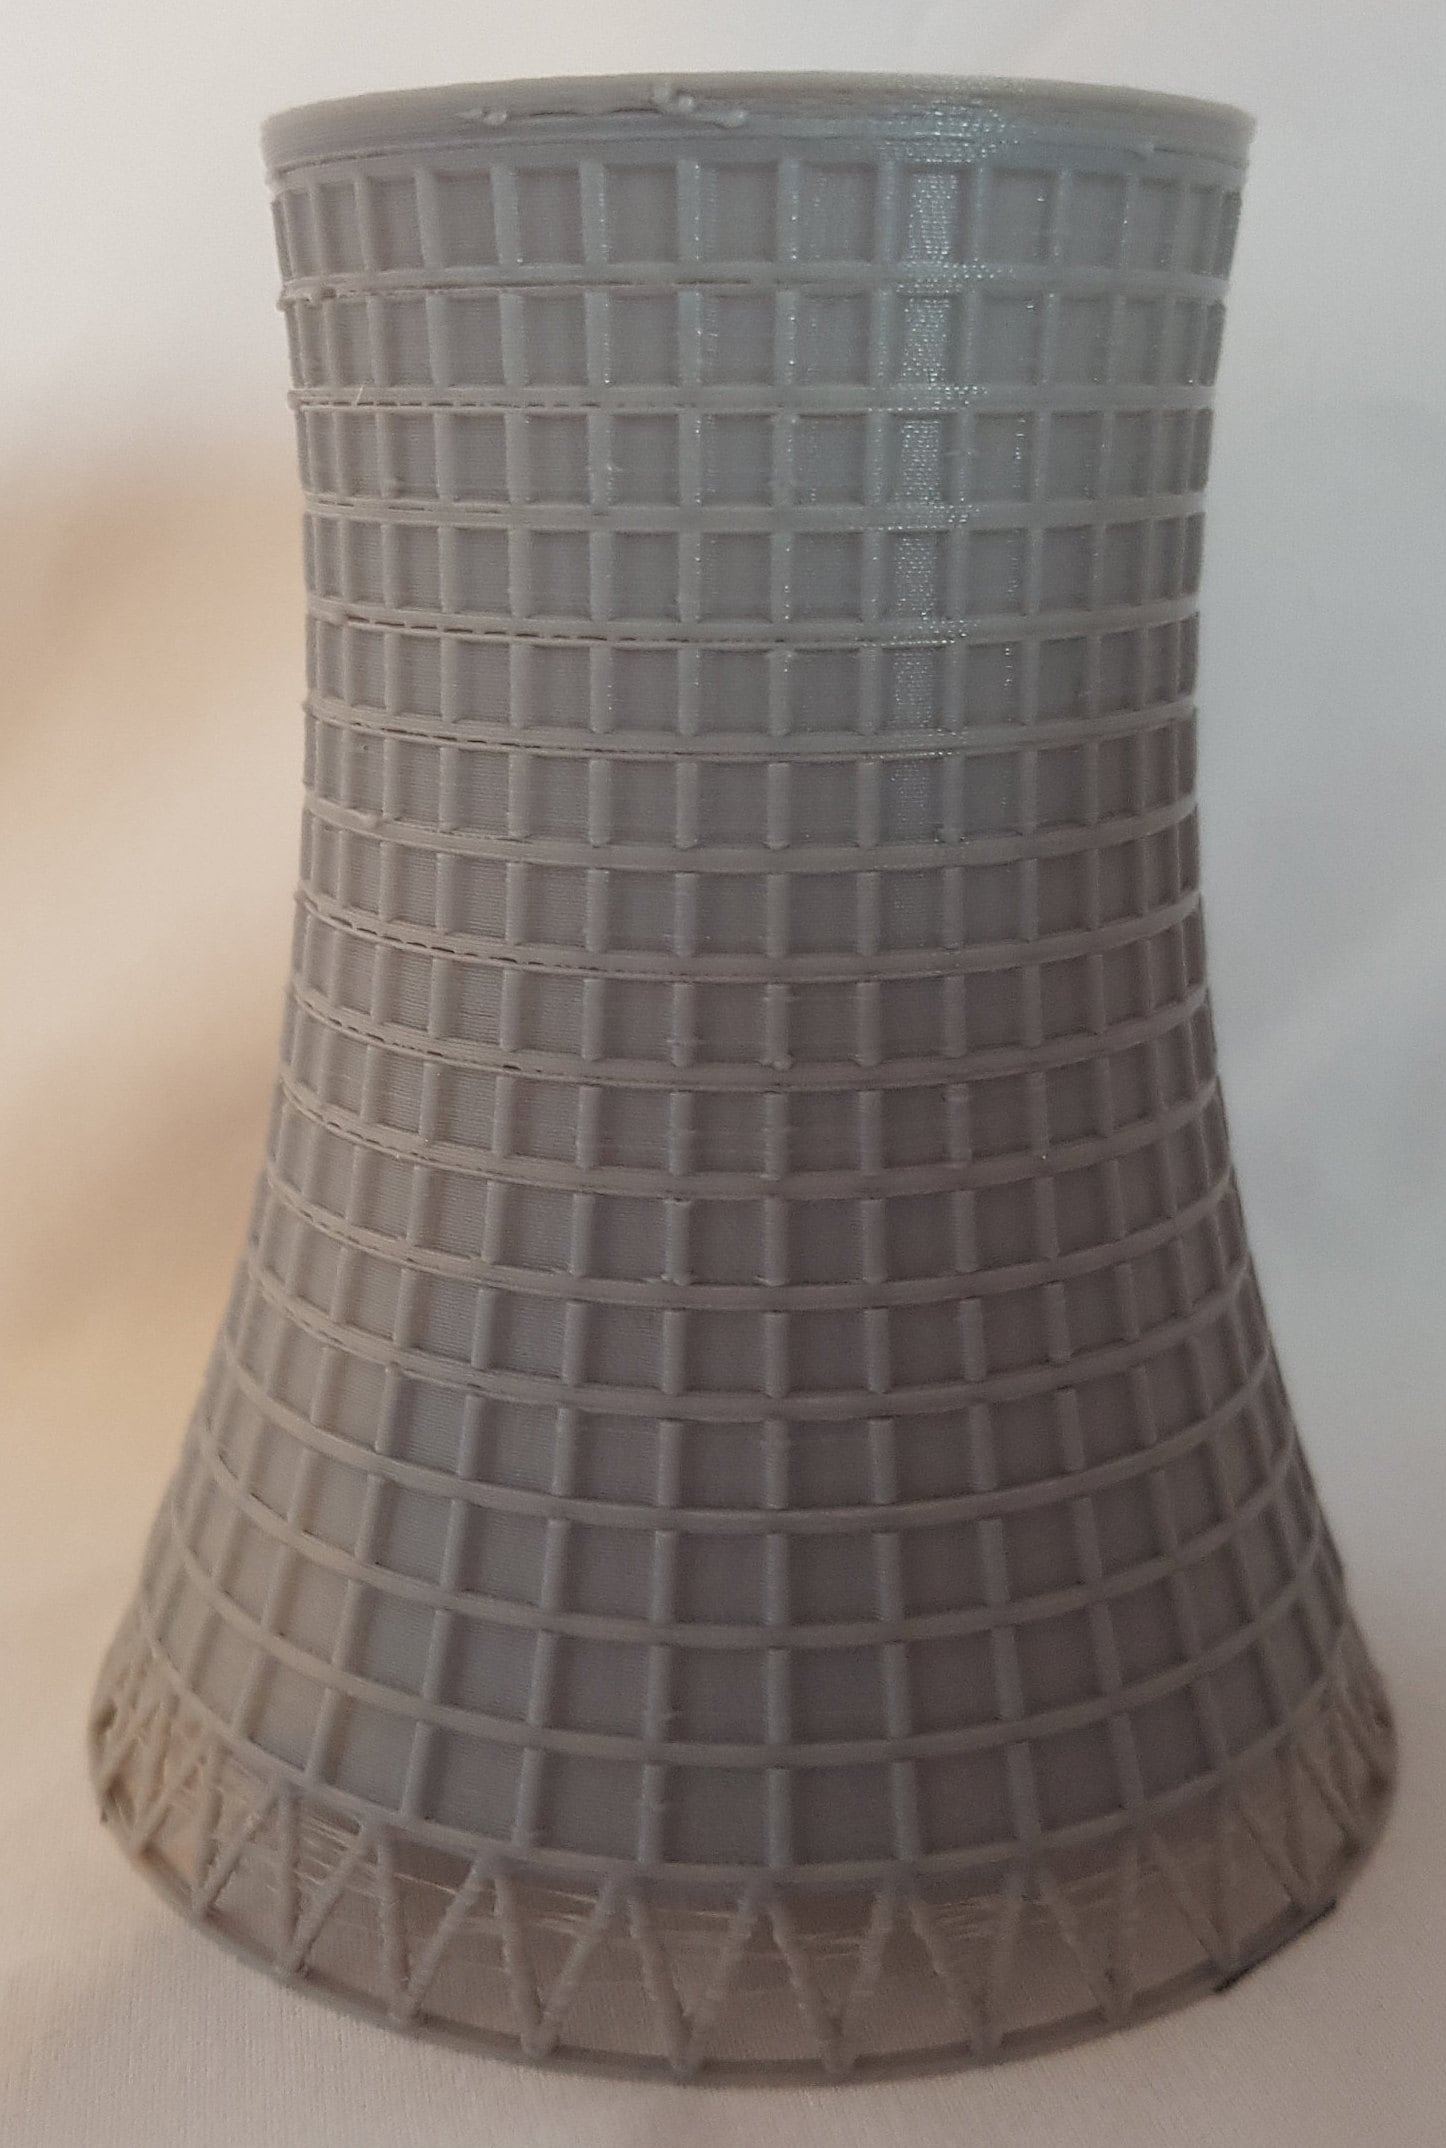 85mm tall 1:2000th Scale Power Station cooling tower 50mm top. 76mm base